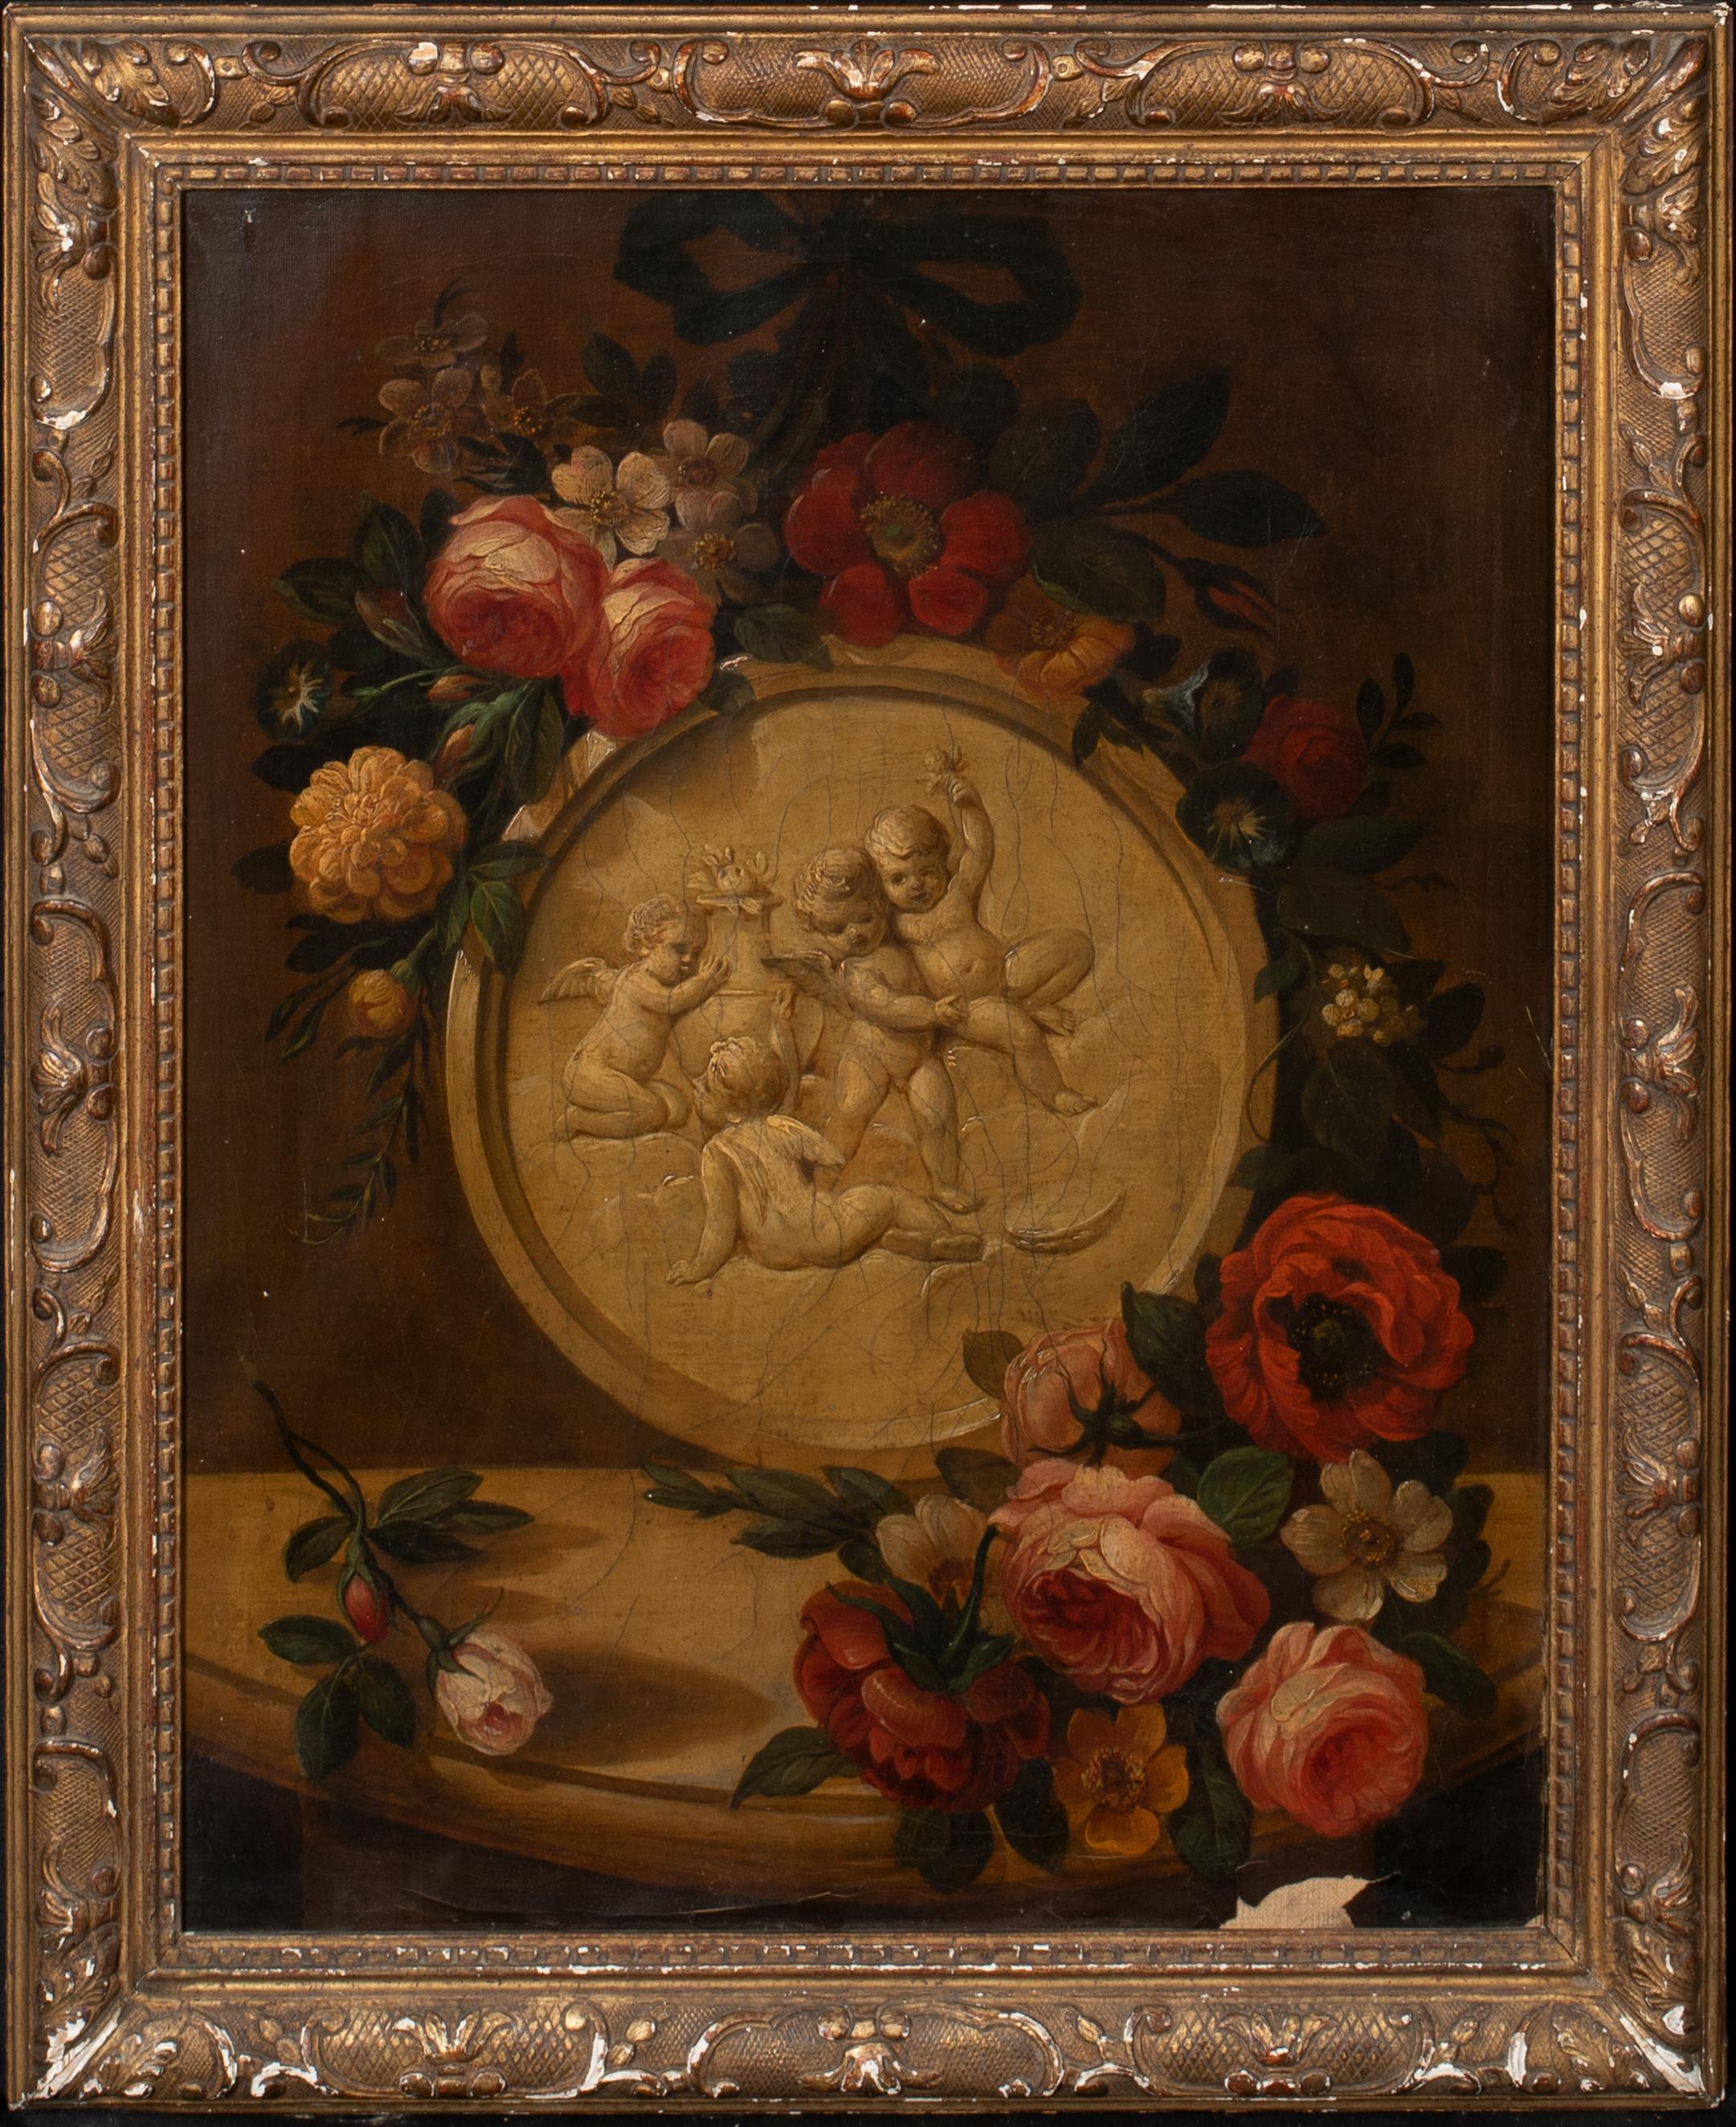 french artist who painted still life with a cherub